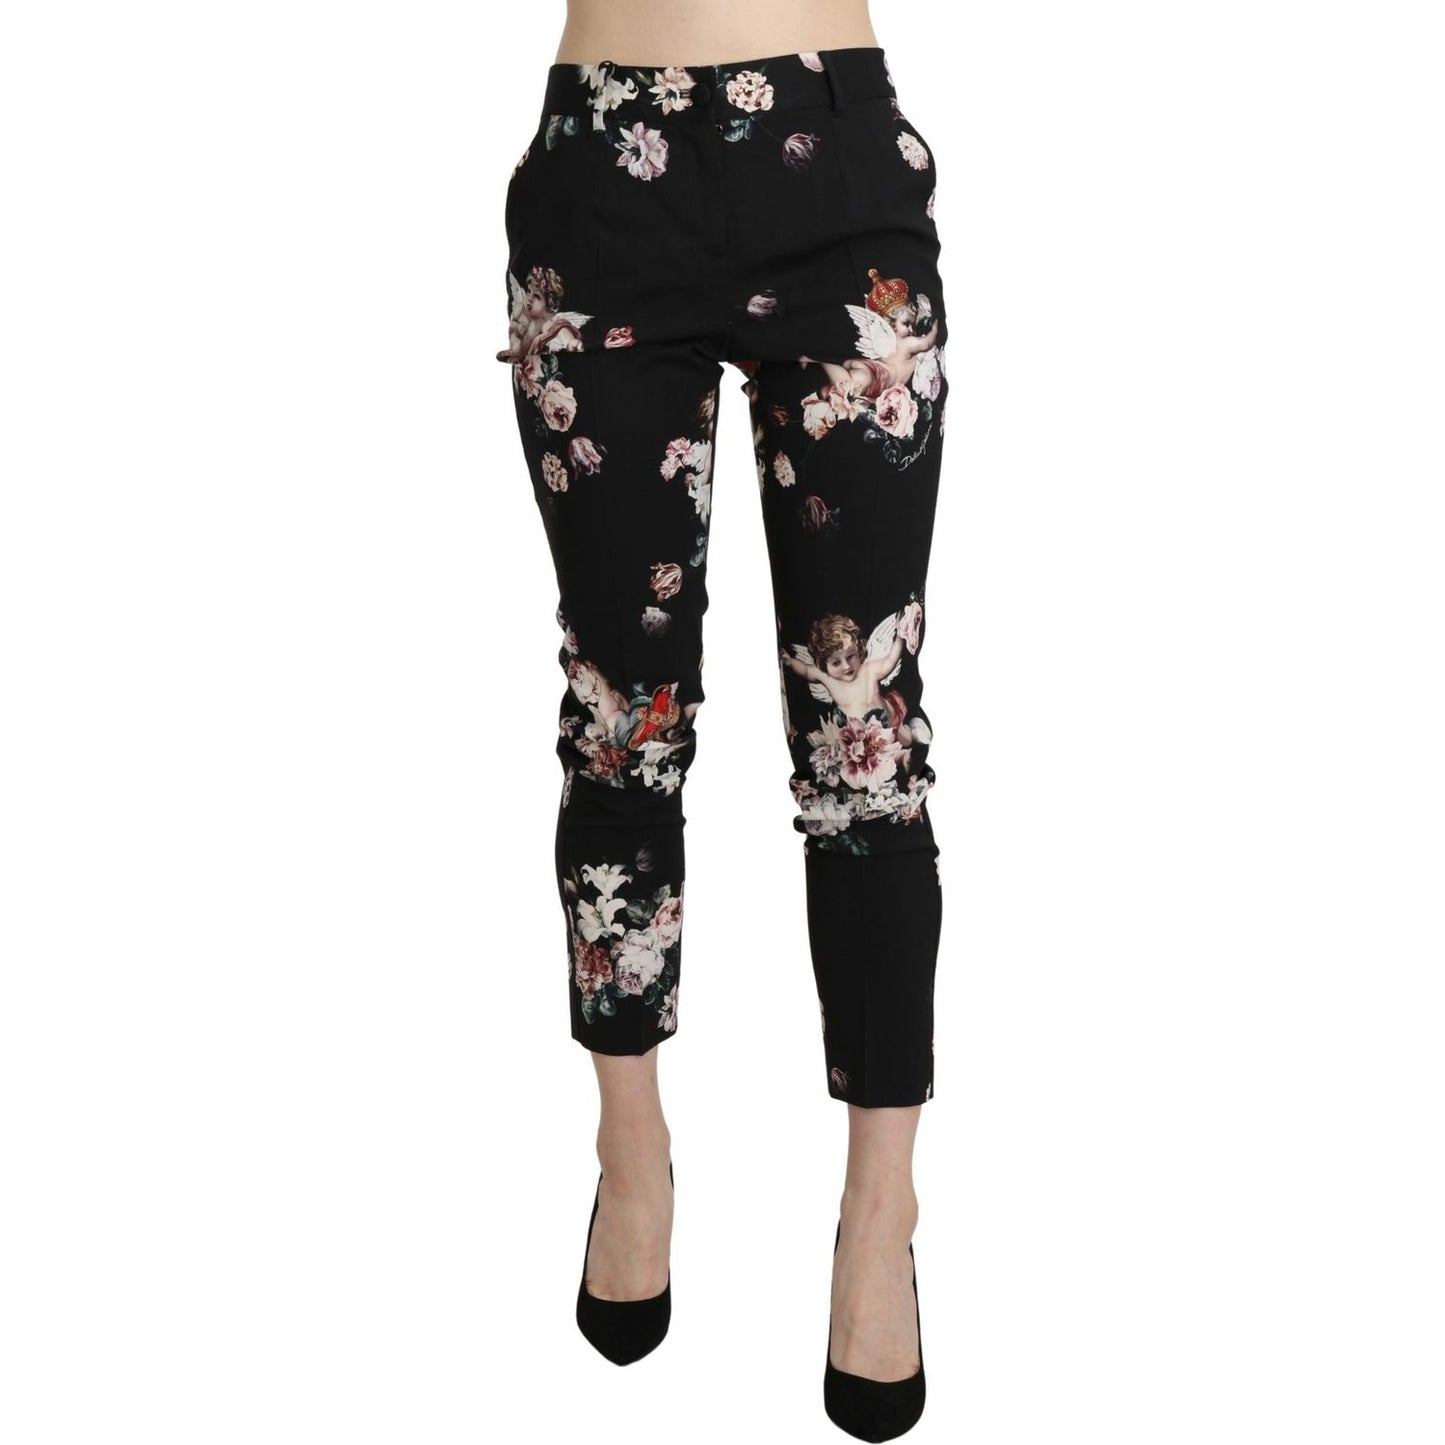 Dolce & Gabbana Elegant High Waist Cropped Trousers Jeans & Pants black-angel-floral-cropped-trouser-wool-pants IMG_0963-scaled-a7d5cdf2-5bc.jpg